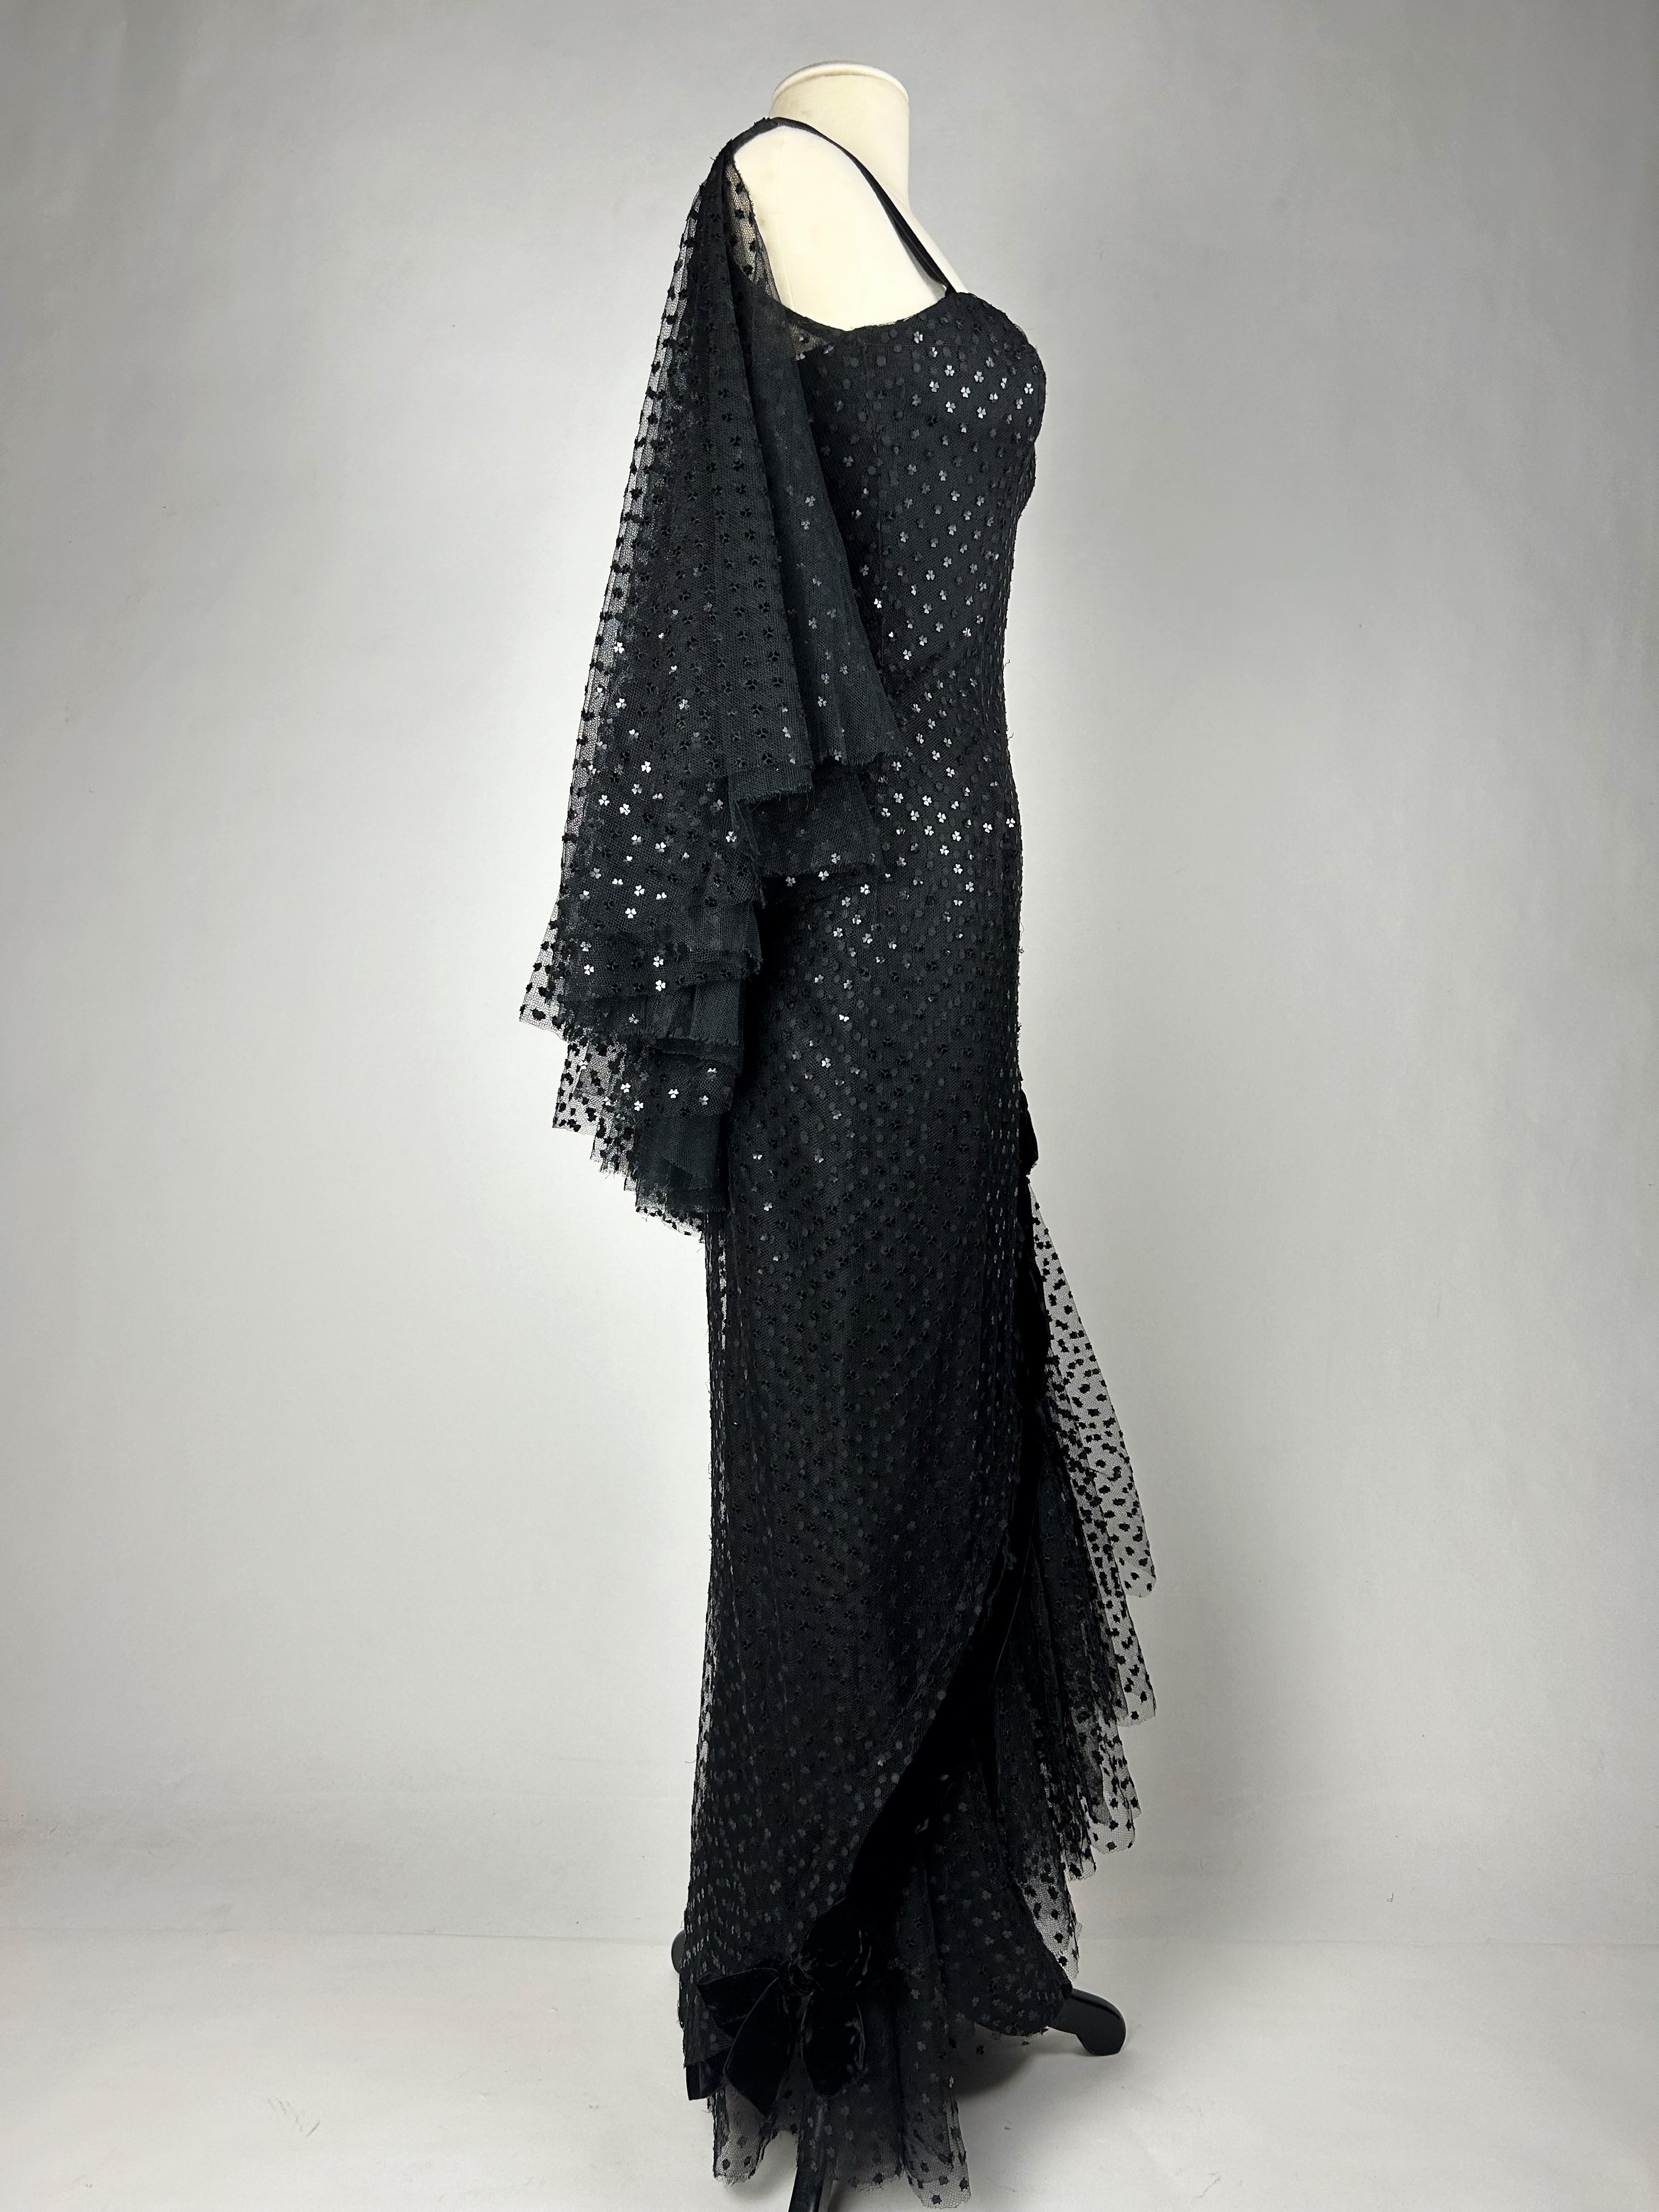 Evening Couture dress by Jean Dessès in black embroidered tulle - France C. 1960 For Sale 9